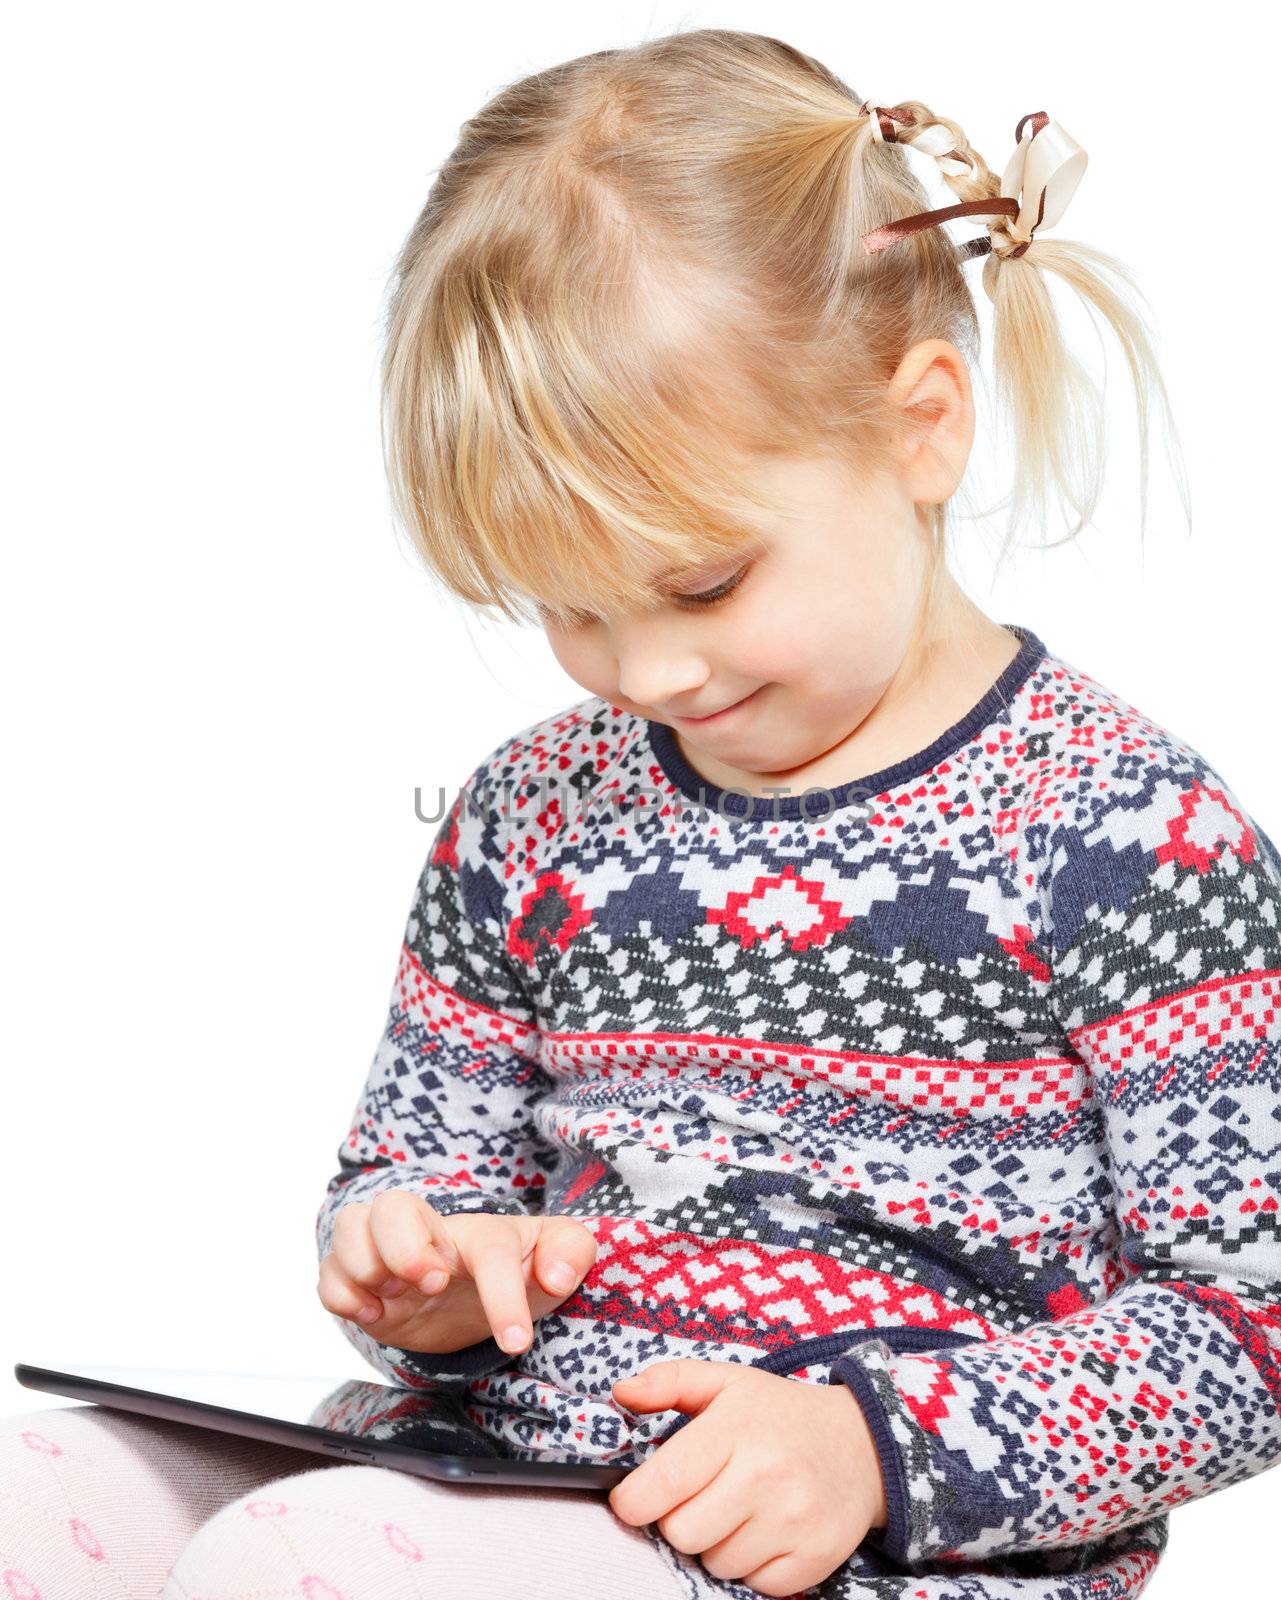 Child playing with a tablet computer by naumoid